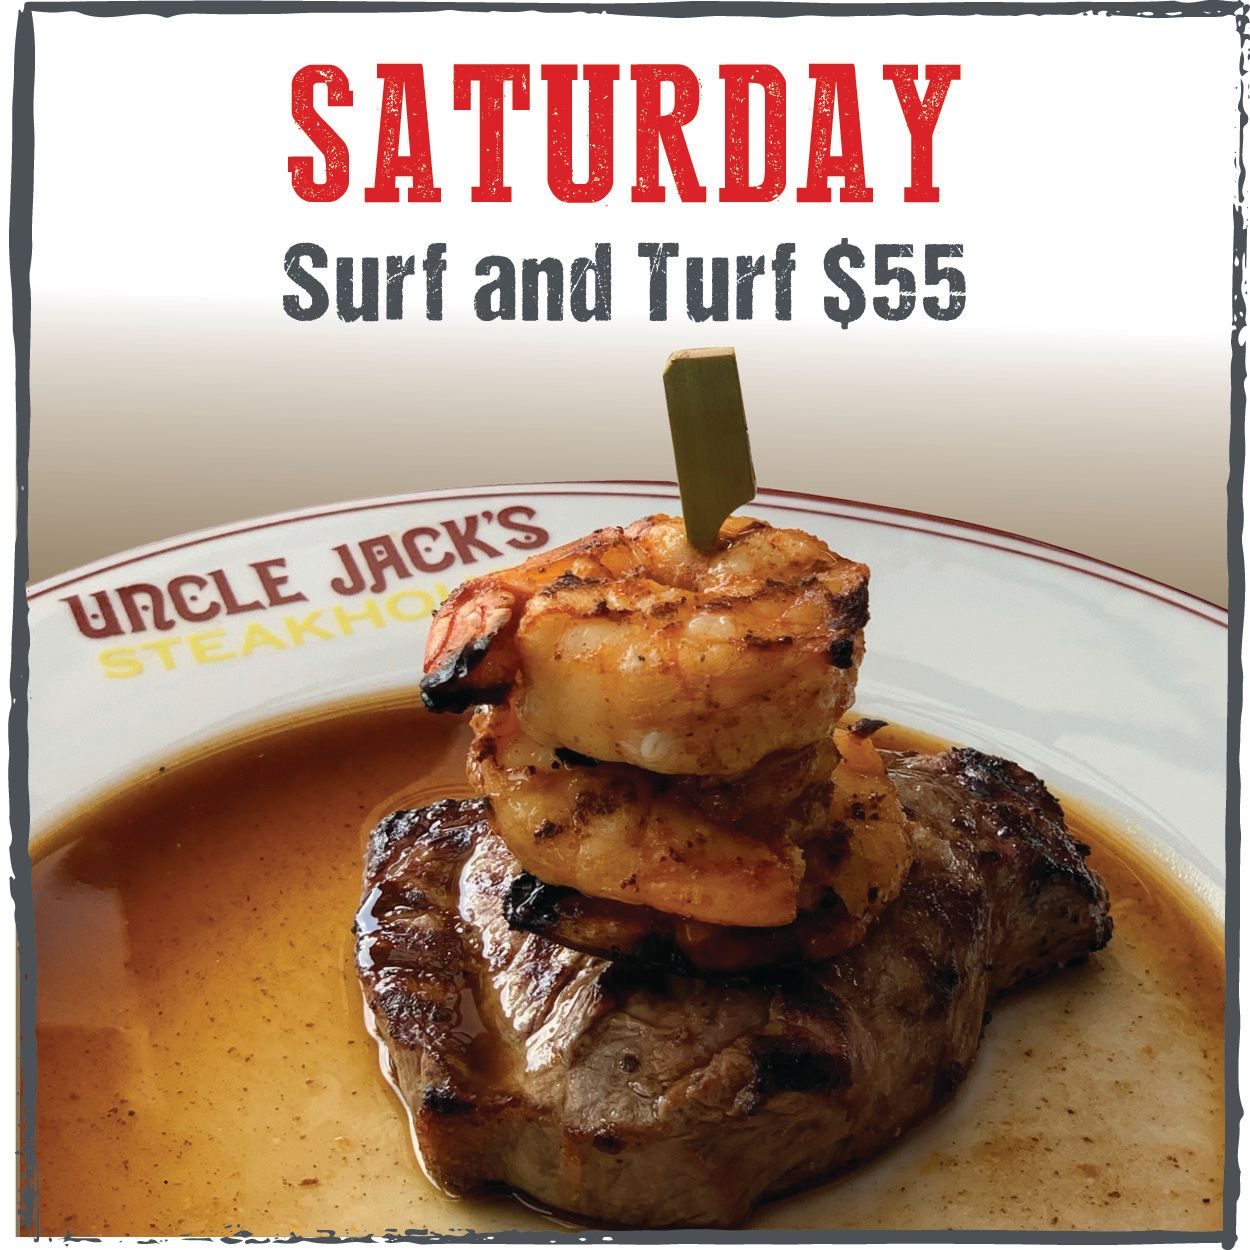 an advertisement for uncle jack 's steakhouse on saturday surf and turf for $55